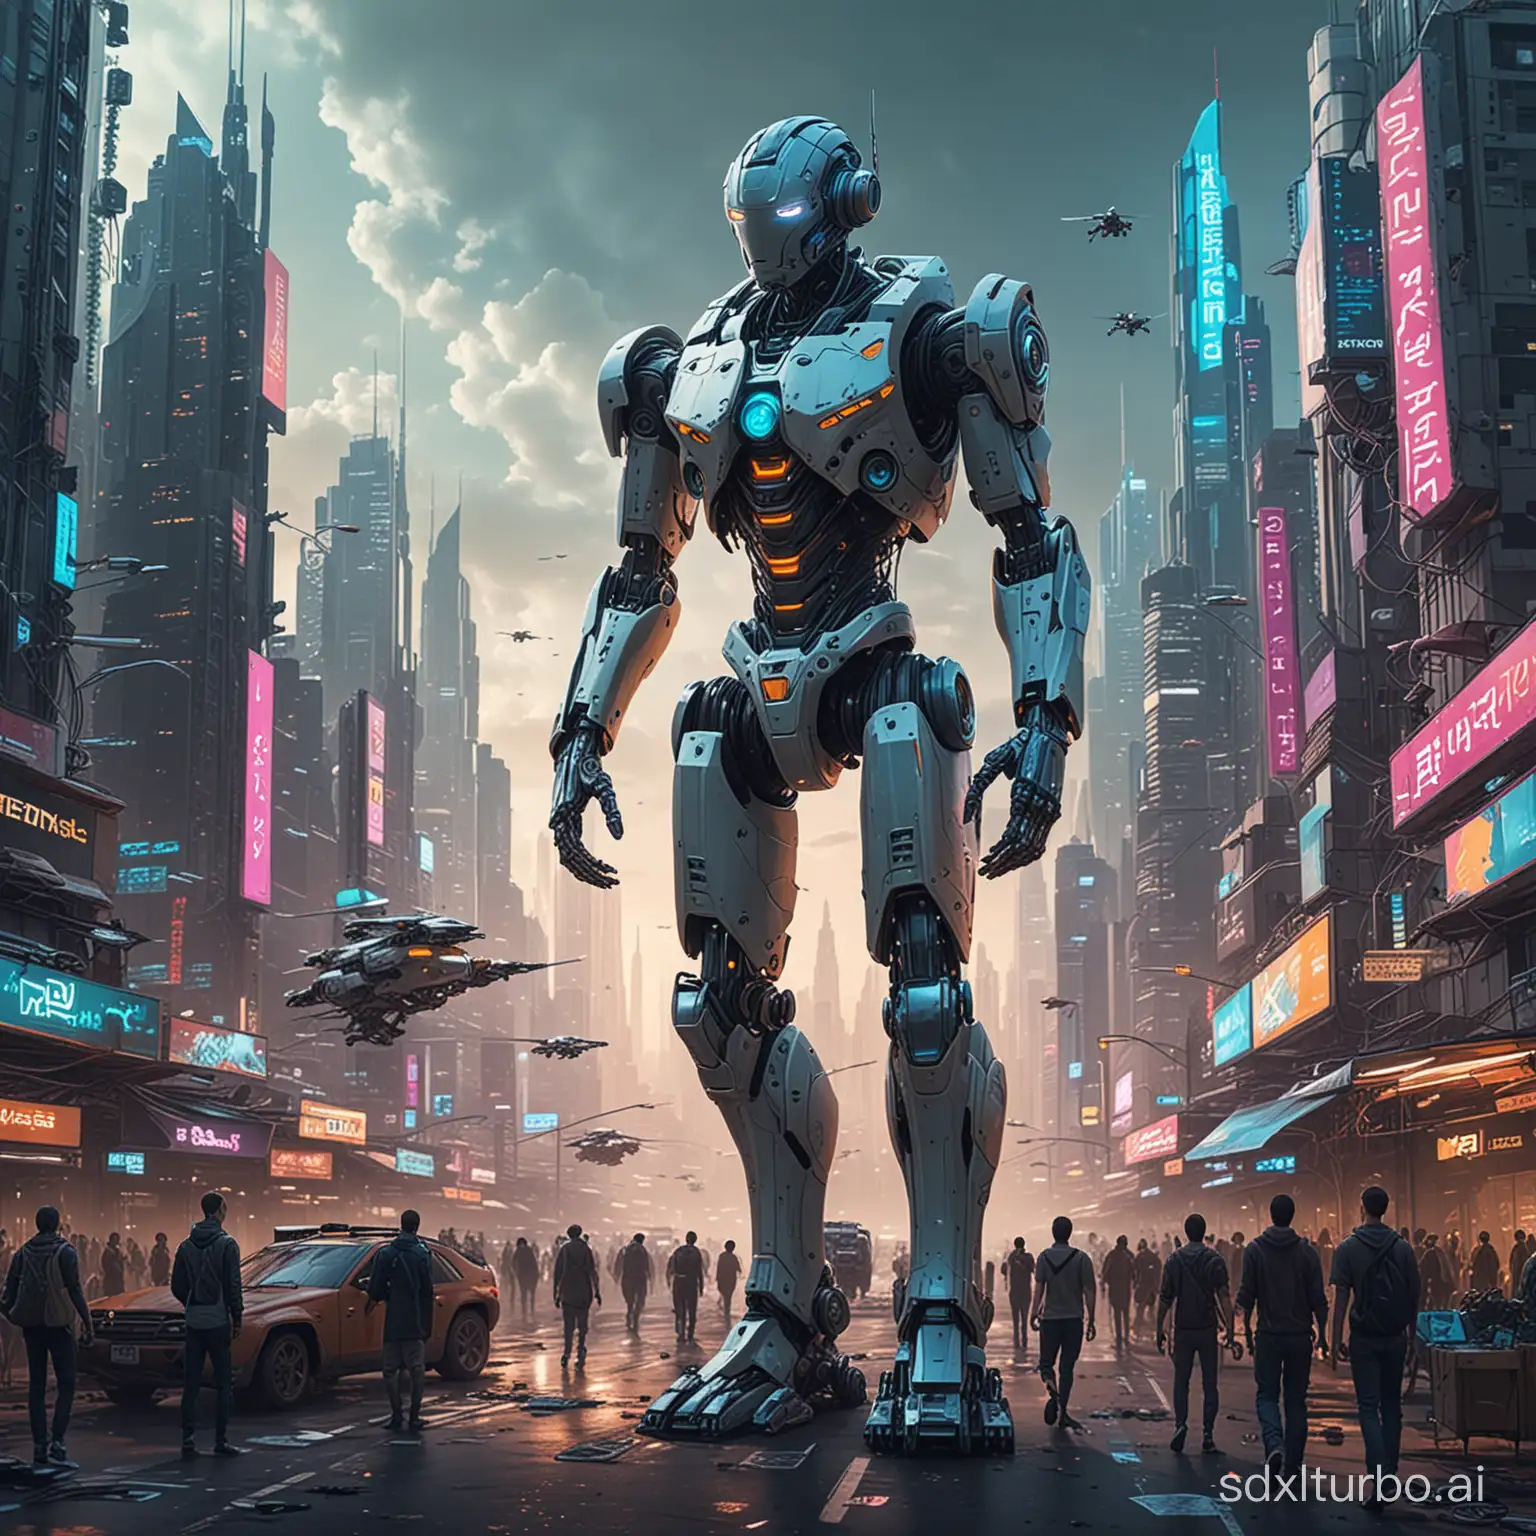 in this cyberpunk-style artwork, we can see a futuristic city full of technology. Skyscrapers and neon lights make up the basic outline of the city. Drones and aircraft dart through the sky, forming a busy transportation scene. <in the center of the image, we can see a group of robots and humans coexisting peacefully. The robots' appearances vary, some have four limbs and a torso like humans, some are weirdly designed. They work and live with humans, with no obvious boundaries between them. <on the streets, people wear fashionable cyberpunk-style clothing, walking side by side with robots. Some people wear virtual reality glasses, immersed in the virtual world; others interact with robots, completing tasks together. <here, the relationship between humans and robots is no longer opposition and rejection, but mutual dependence and coexistence. <in the corner of the image, there is a robot repair shop. Inside, robots and human technicians work together to repair and upgrade robots. This indicates that in this world, robots have become an indispensable part of human life, and people have gotten used to living with robots. <in the distant sky, a giant billboard in the sky displays the words 'coexistence of robots and humans', emphasizing this theme. The entire image is filled with the atmosphere of future technology, presenting a harmonious world of robots and humans living together. <in summary, this cyberpunk-style artwork displays a future world full of technology, where robots and humans coexist peacefully and create a good life together.>